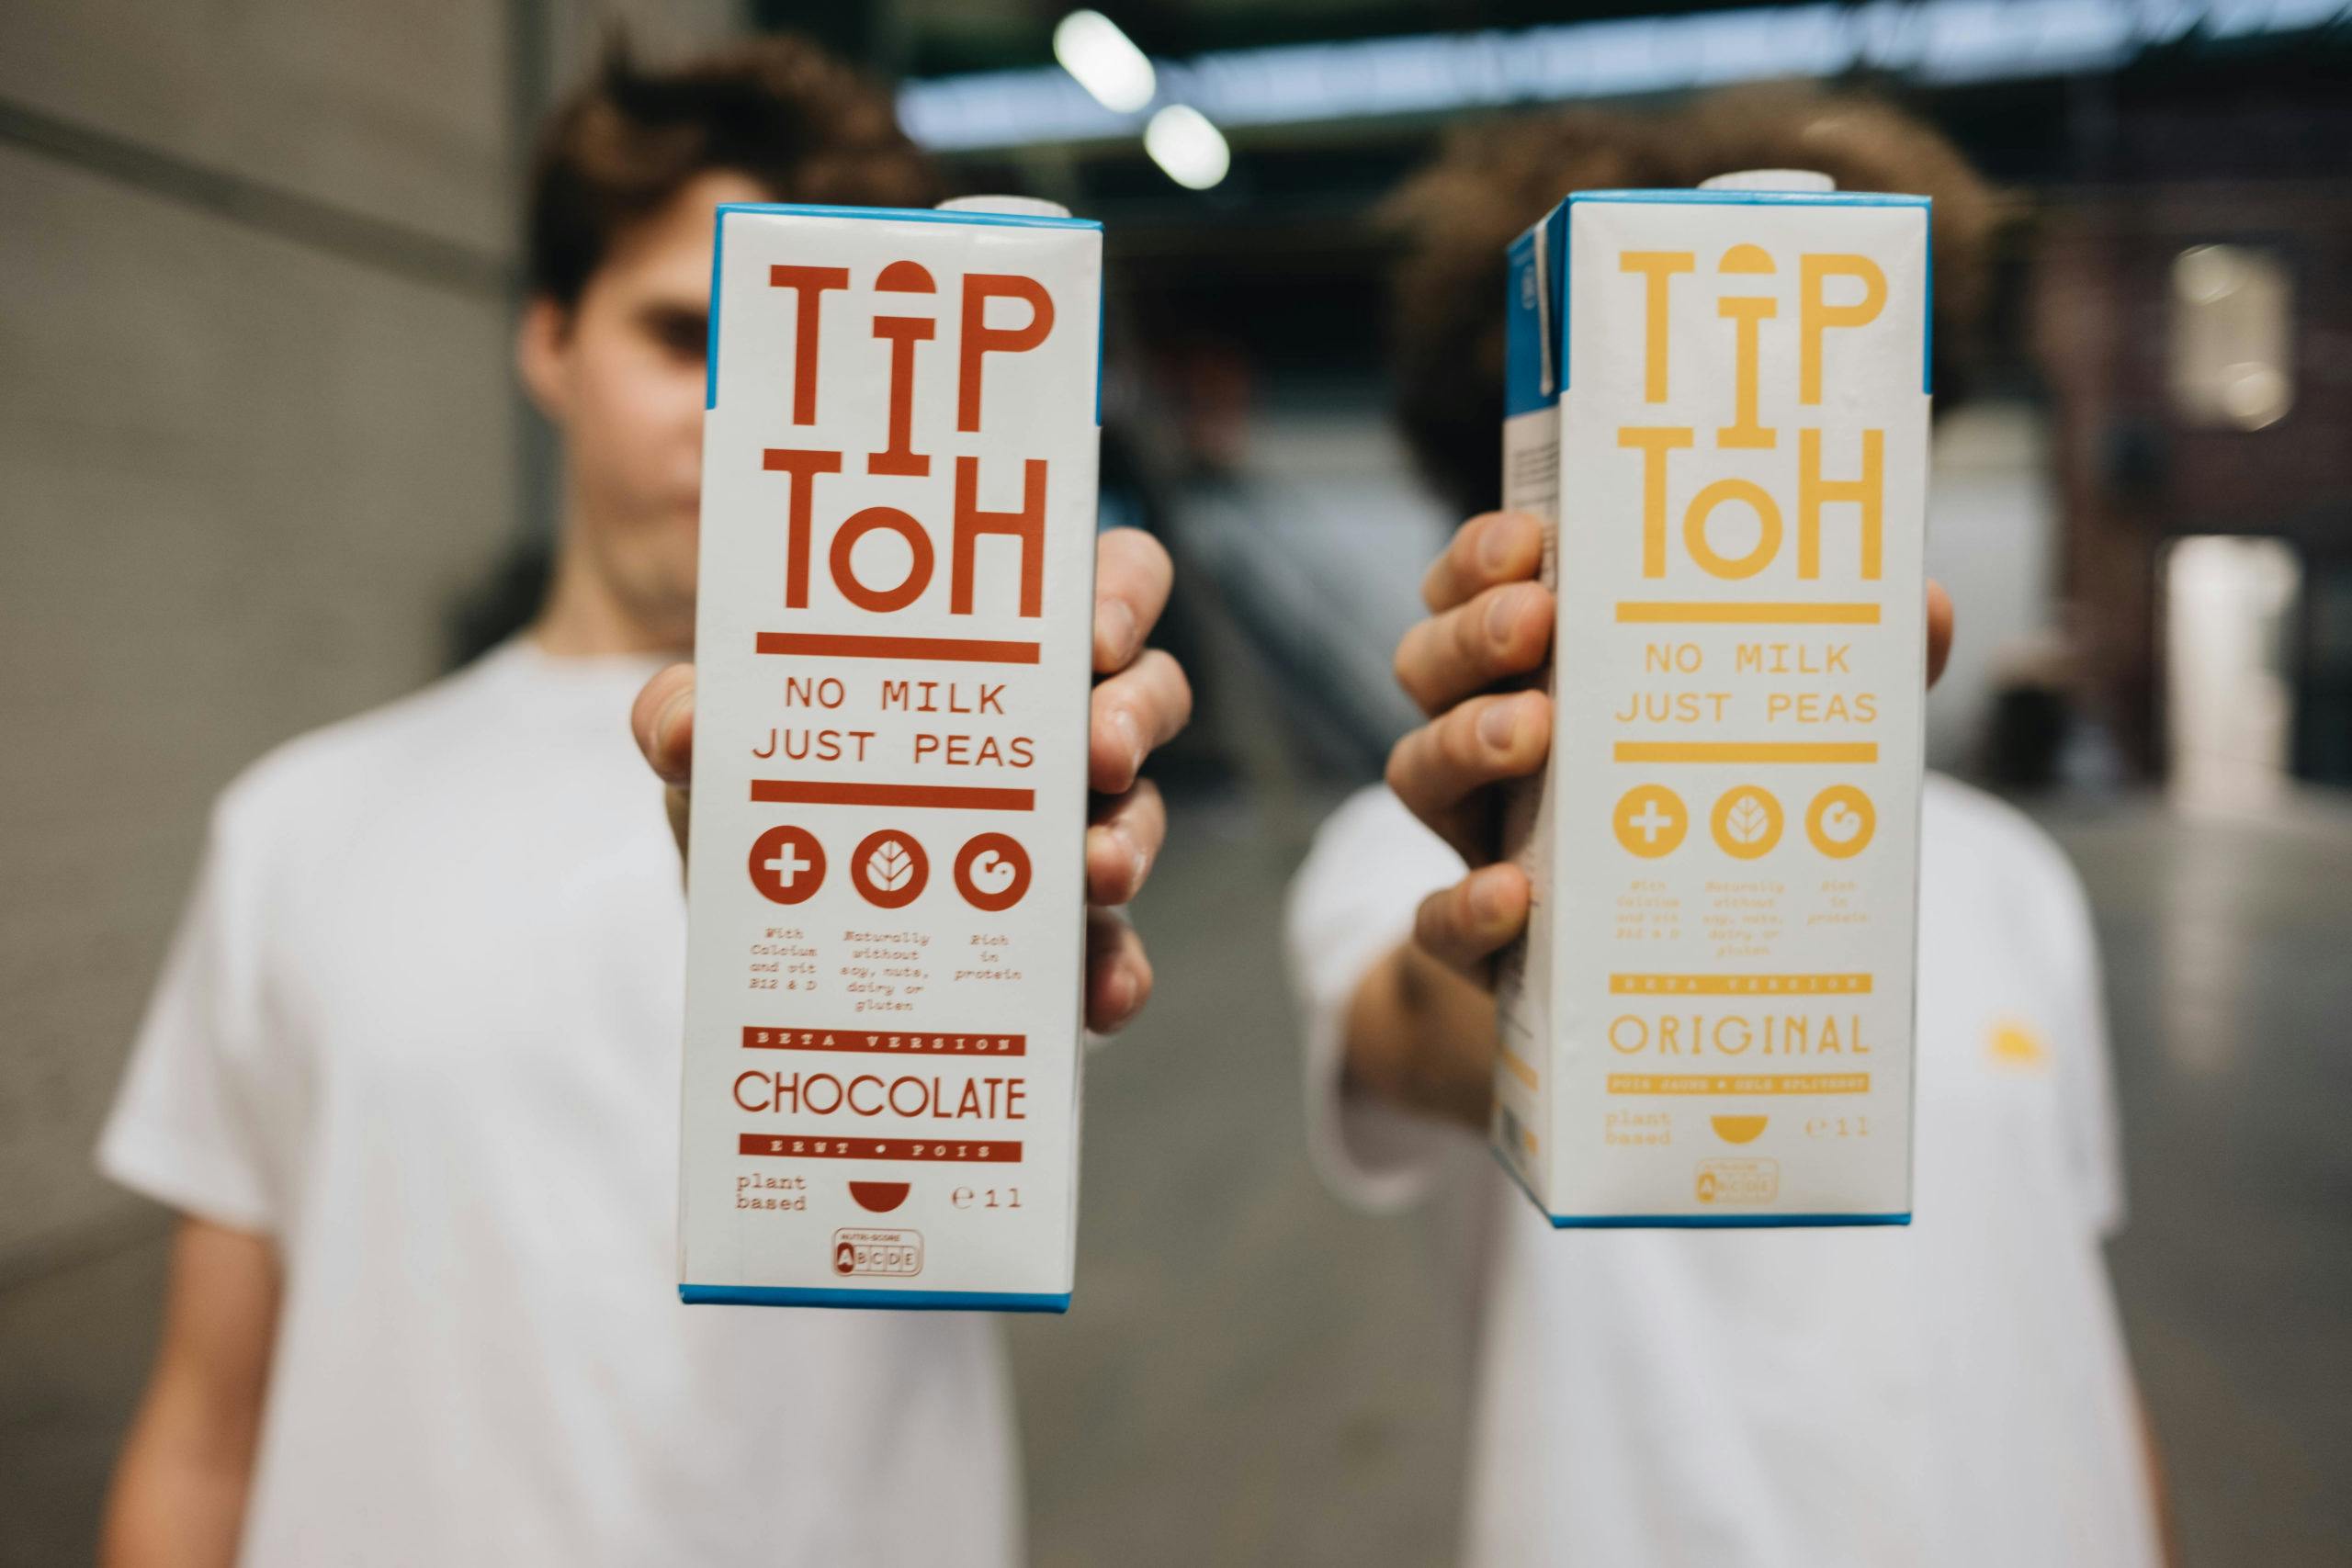 Two cartons of plant-based dairy alternatives by TipToh